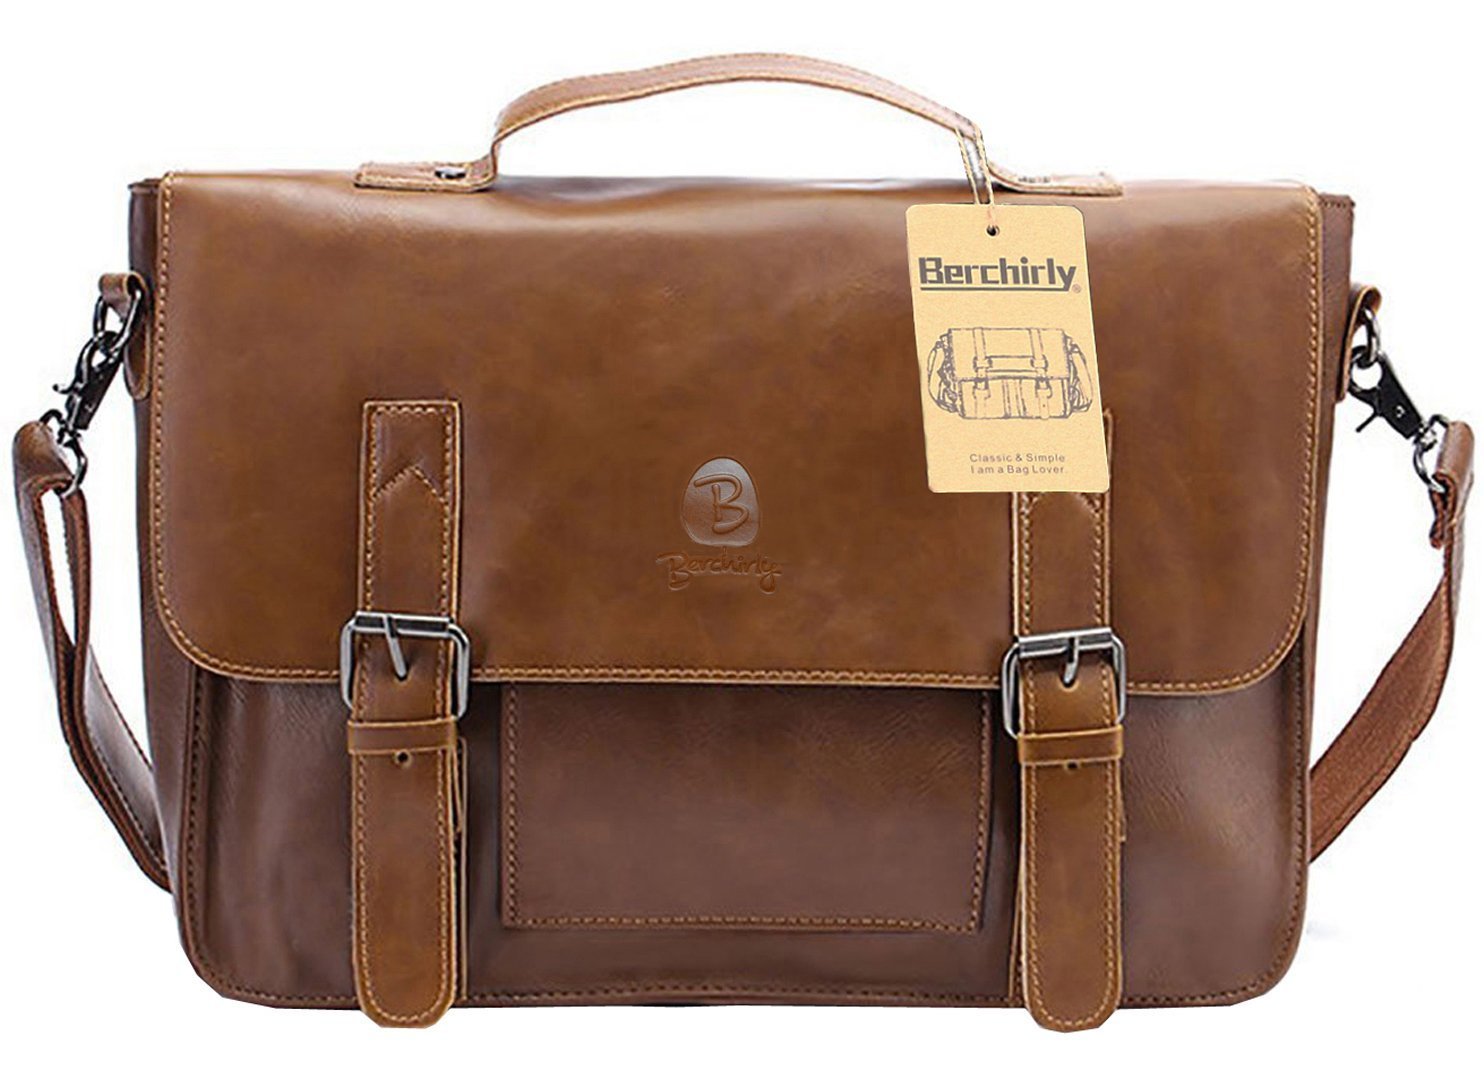 Amazon: Vintage Leather Briefcase, Berchirly PU Leather Shoulder ...